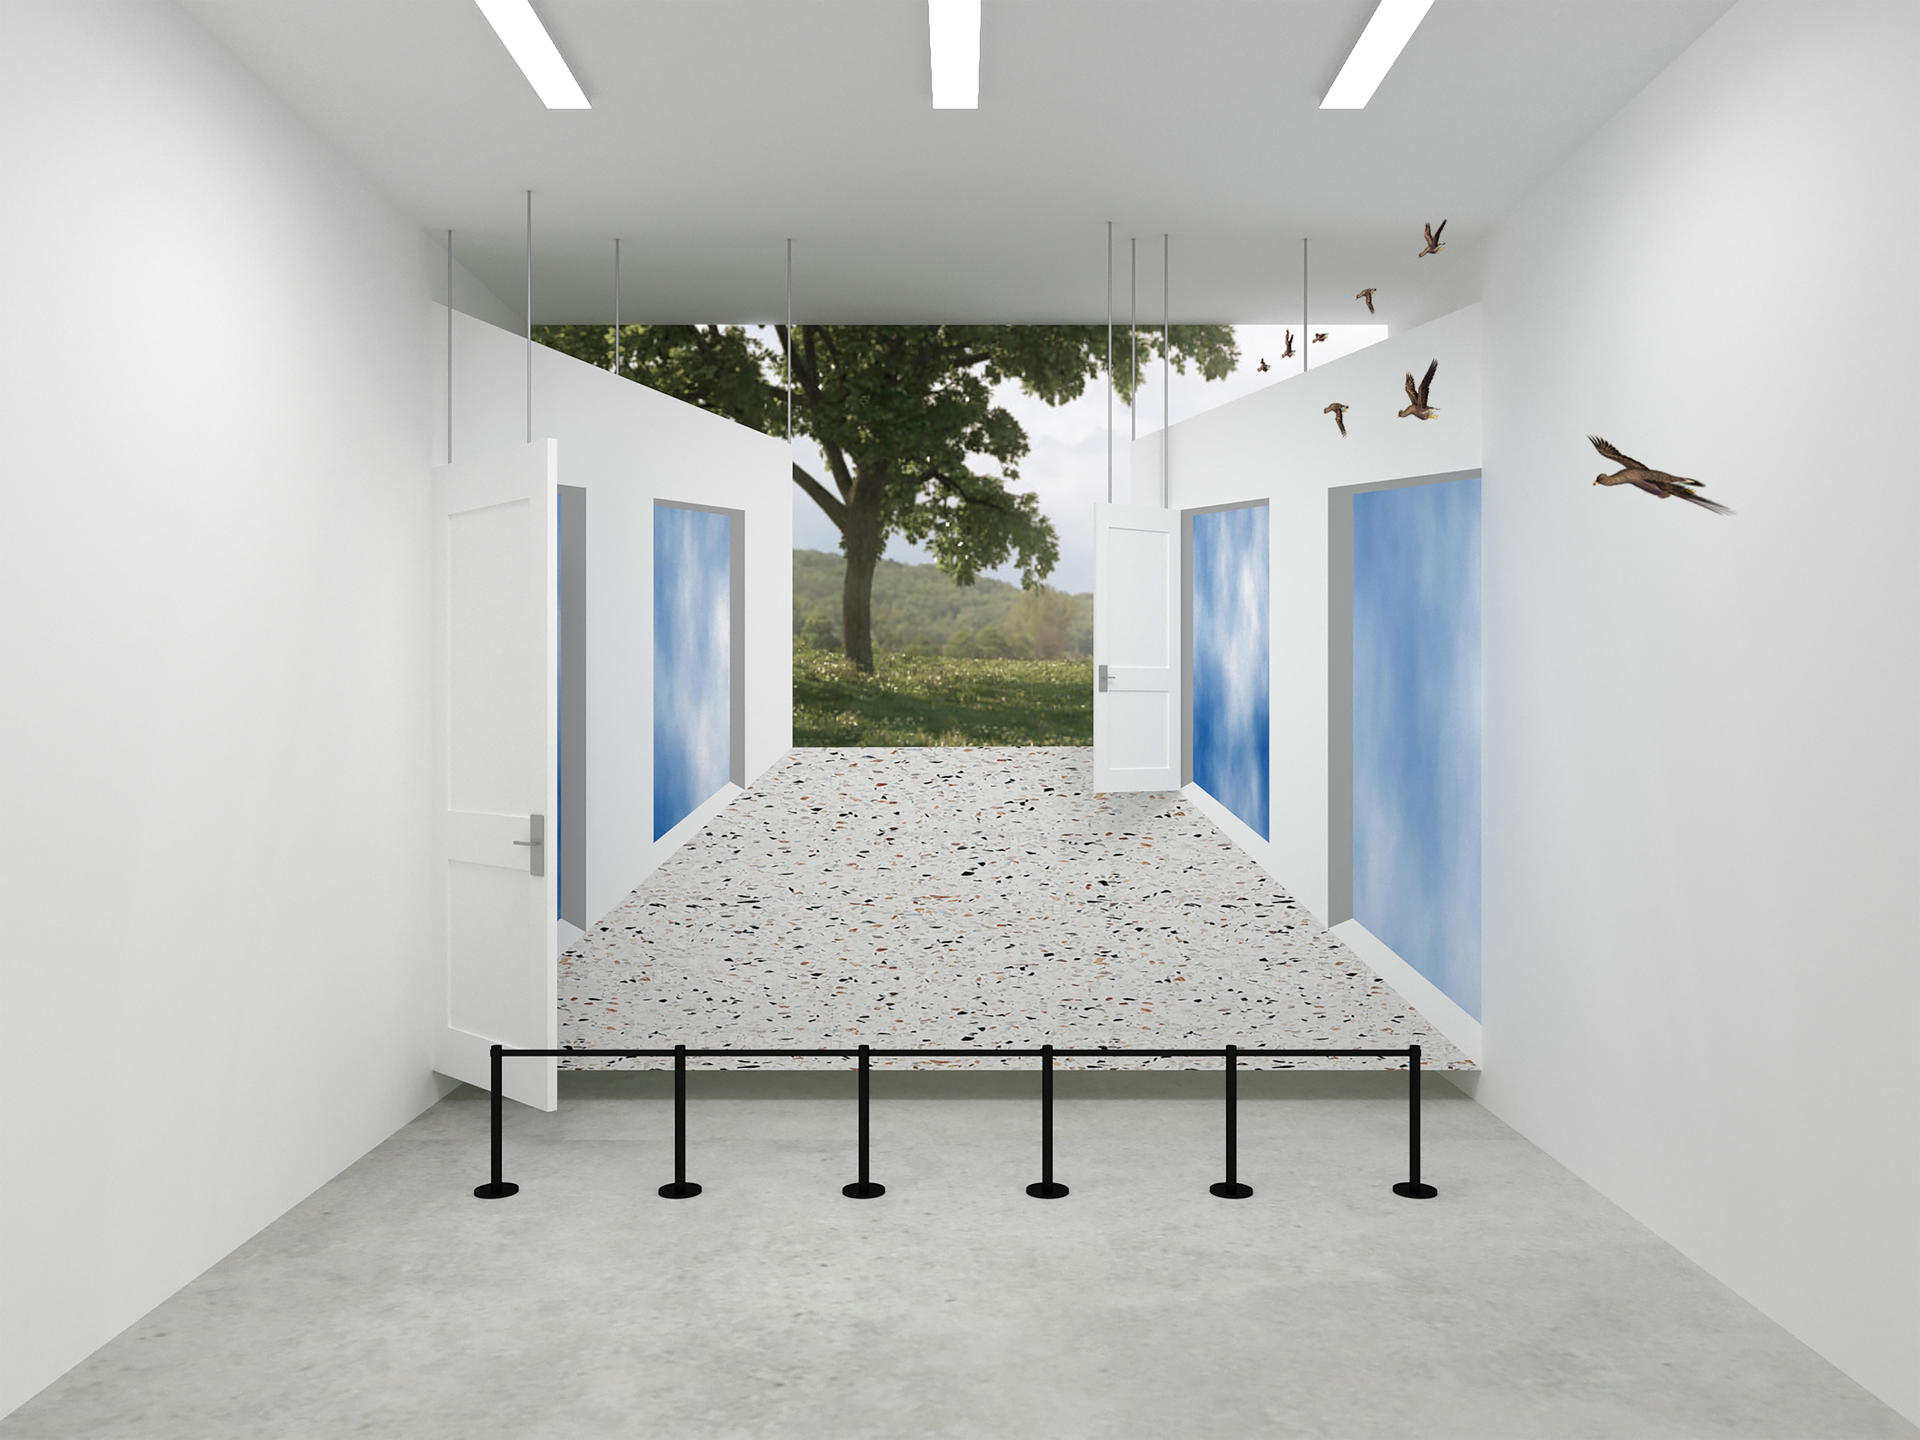 A scene of a gallery space with an artificial perspective to the exterior as an installation.  